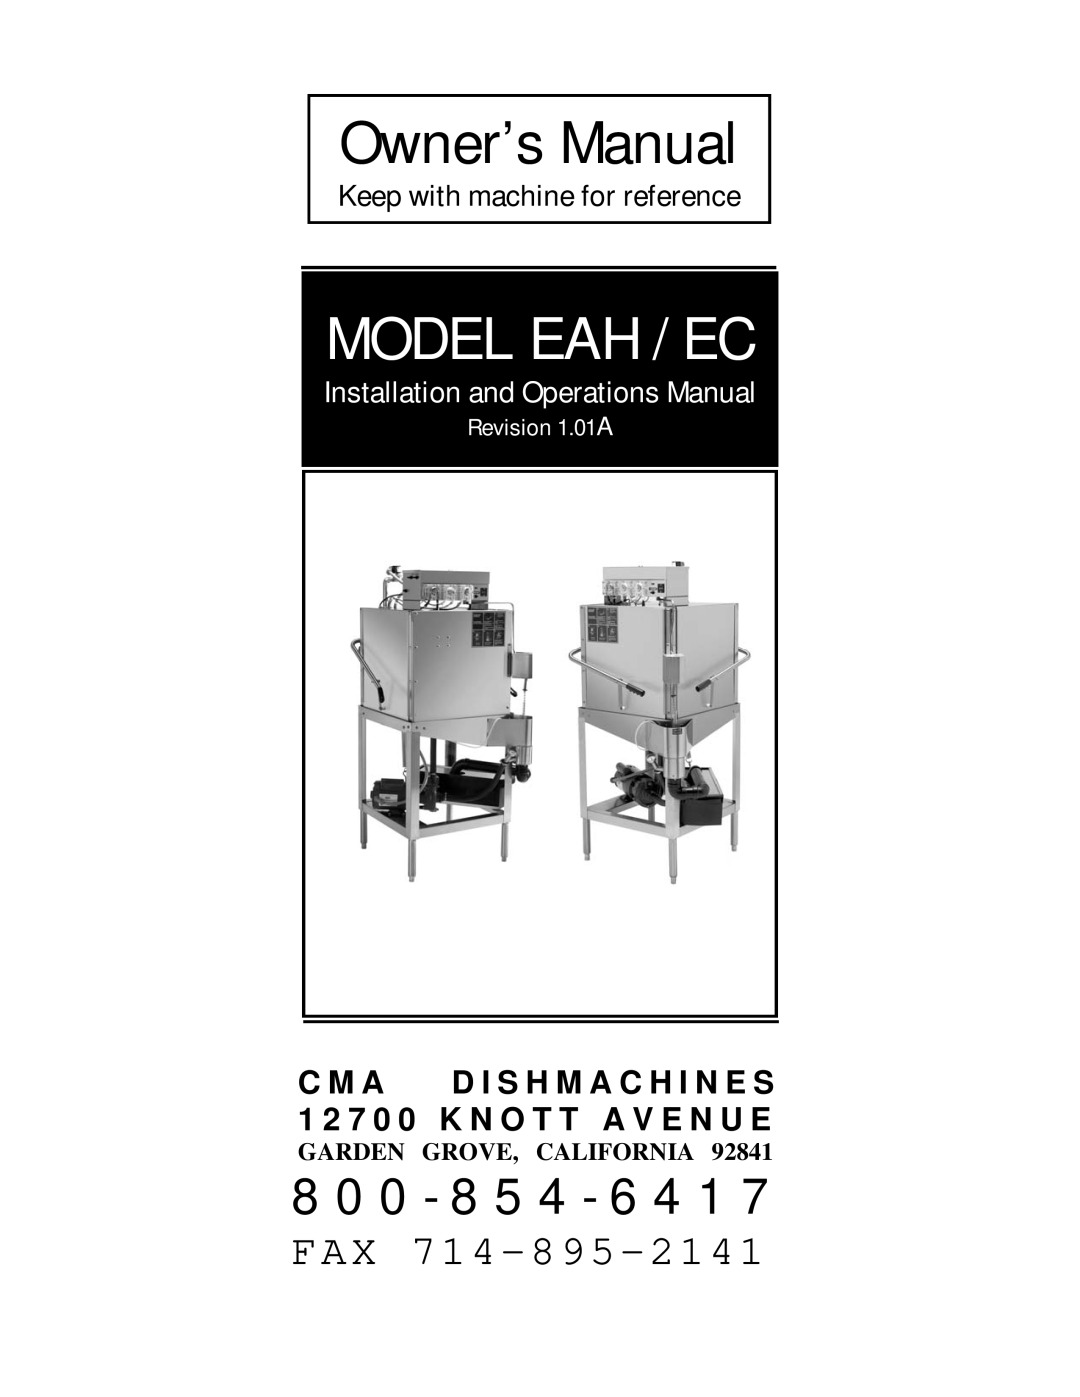 CMA Dishmachines EAH/EC owner manual Owner’s Manual, Model Eah / Ec, 8 0 0 - 8 5 4 - 6 4, Keep with machine for reference 